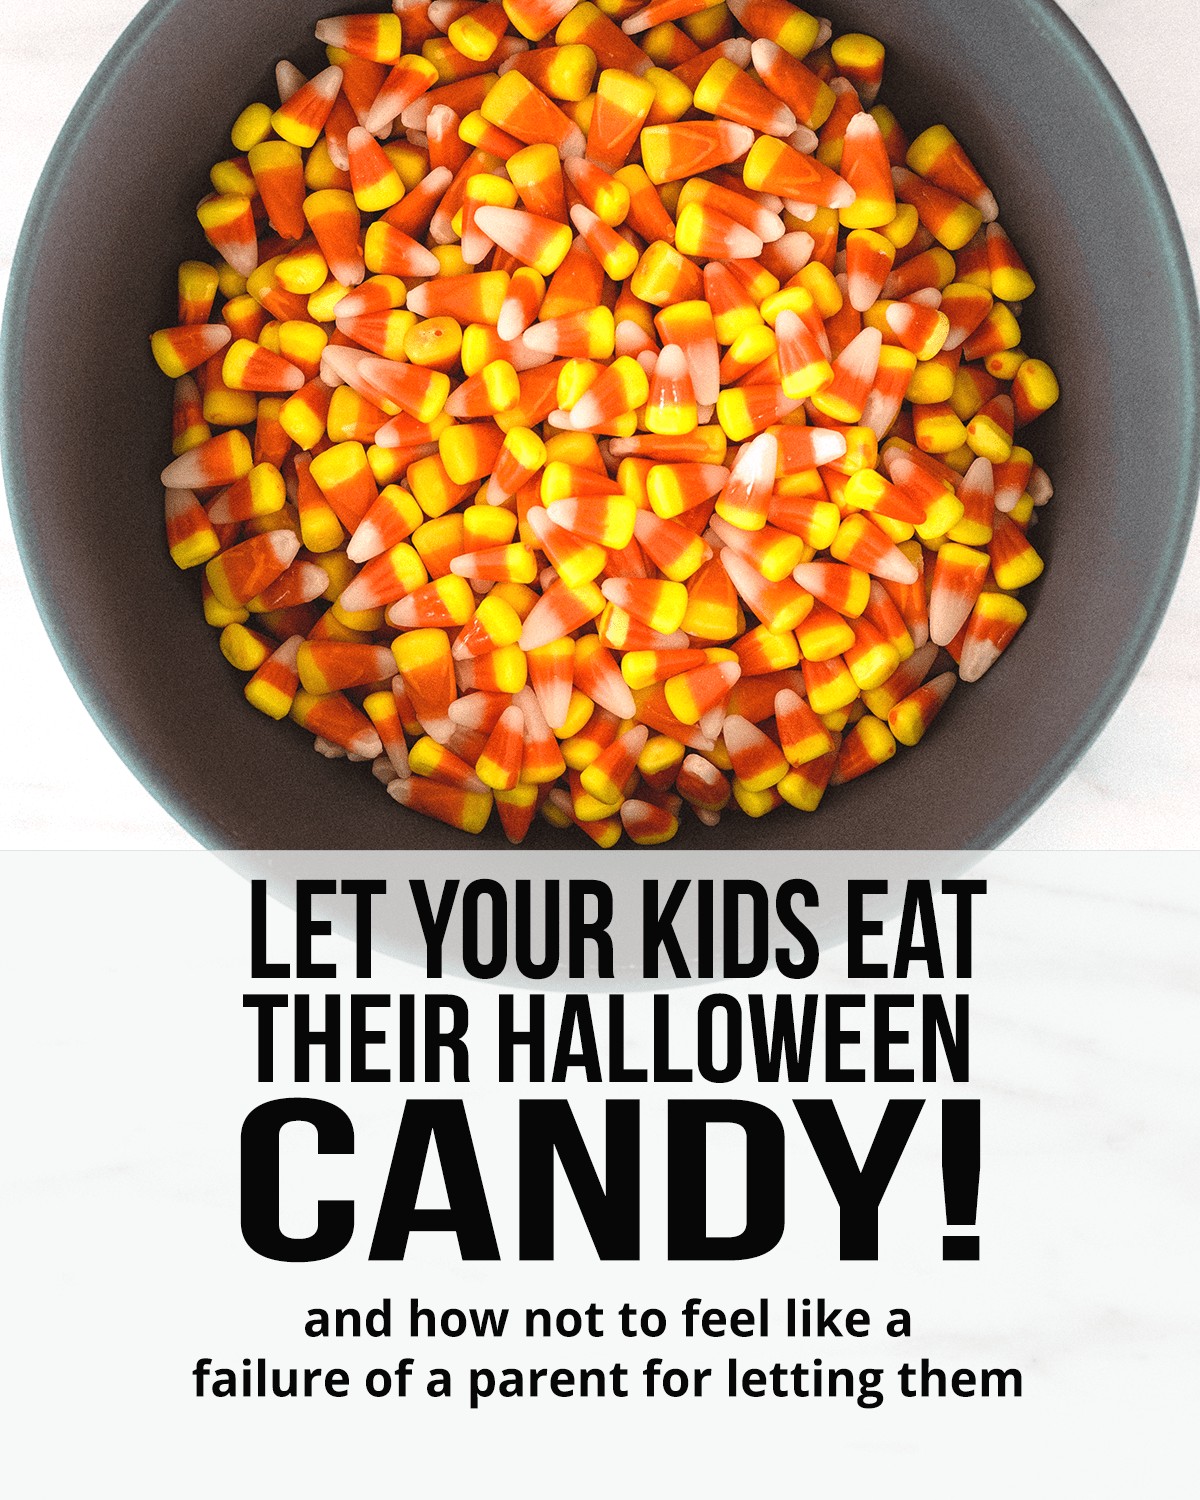 How to let your kids eat ALL the Halloween candy they want (and not feel like a failure of a parent for doing so!) #halloween #halloweencandy #parentingwin #feedingkids #healthykids #halloweentreats